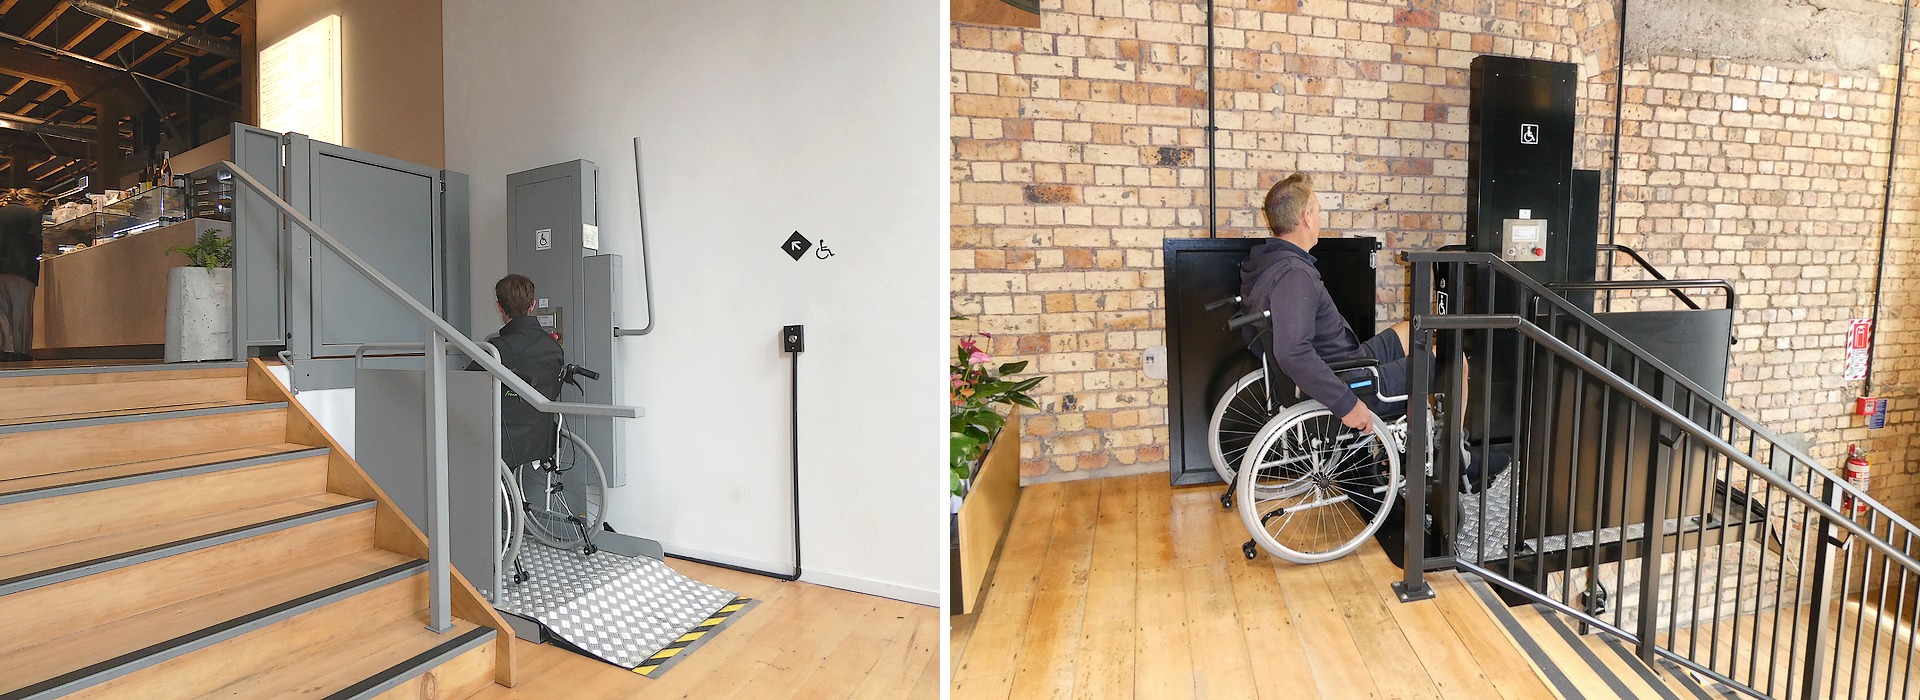 AreaLift’s DomoStep platform lifts are available from McGrath Industries in NZ for disability access in commercial settings and residential homes